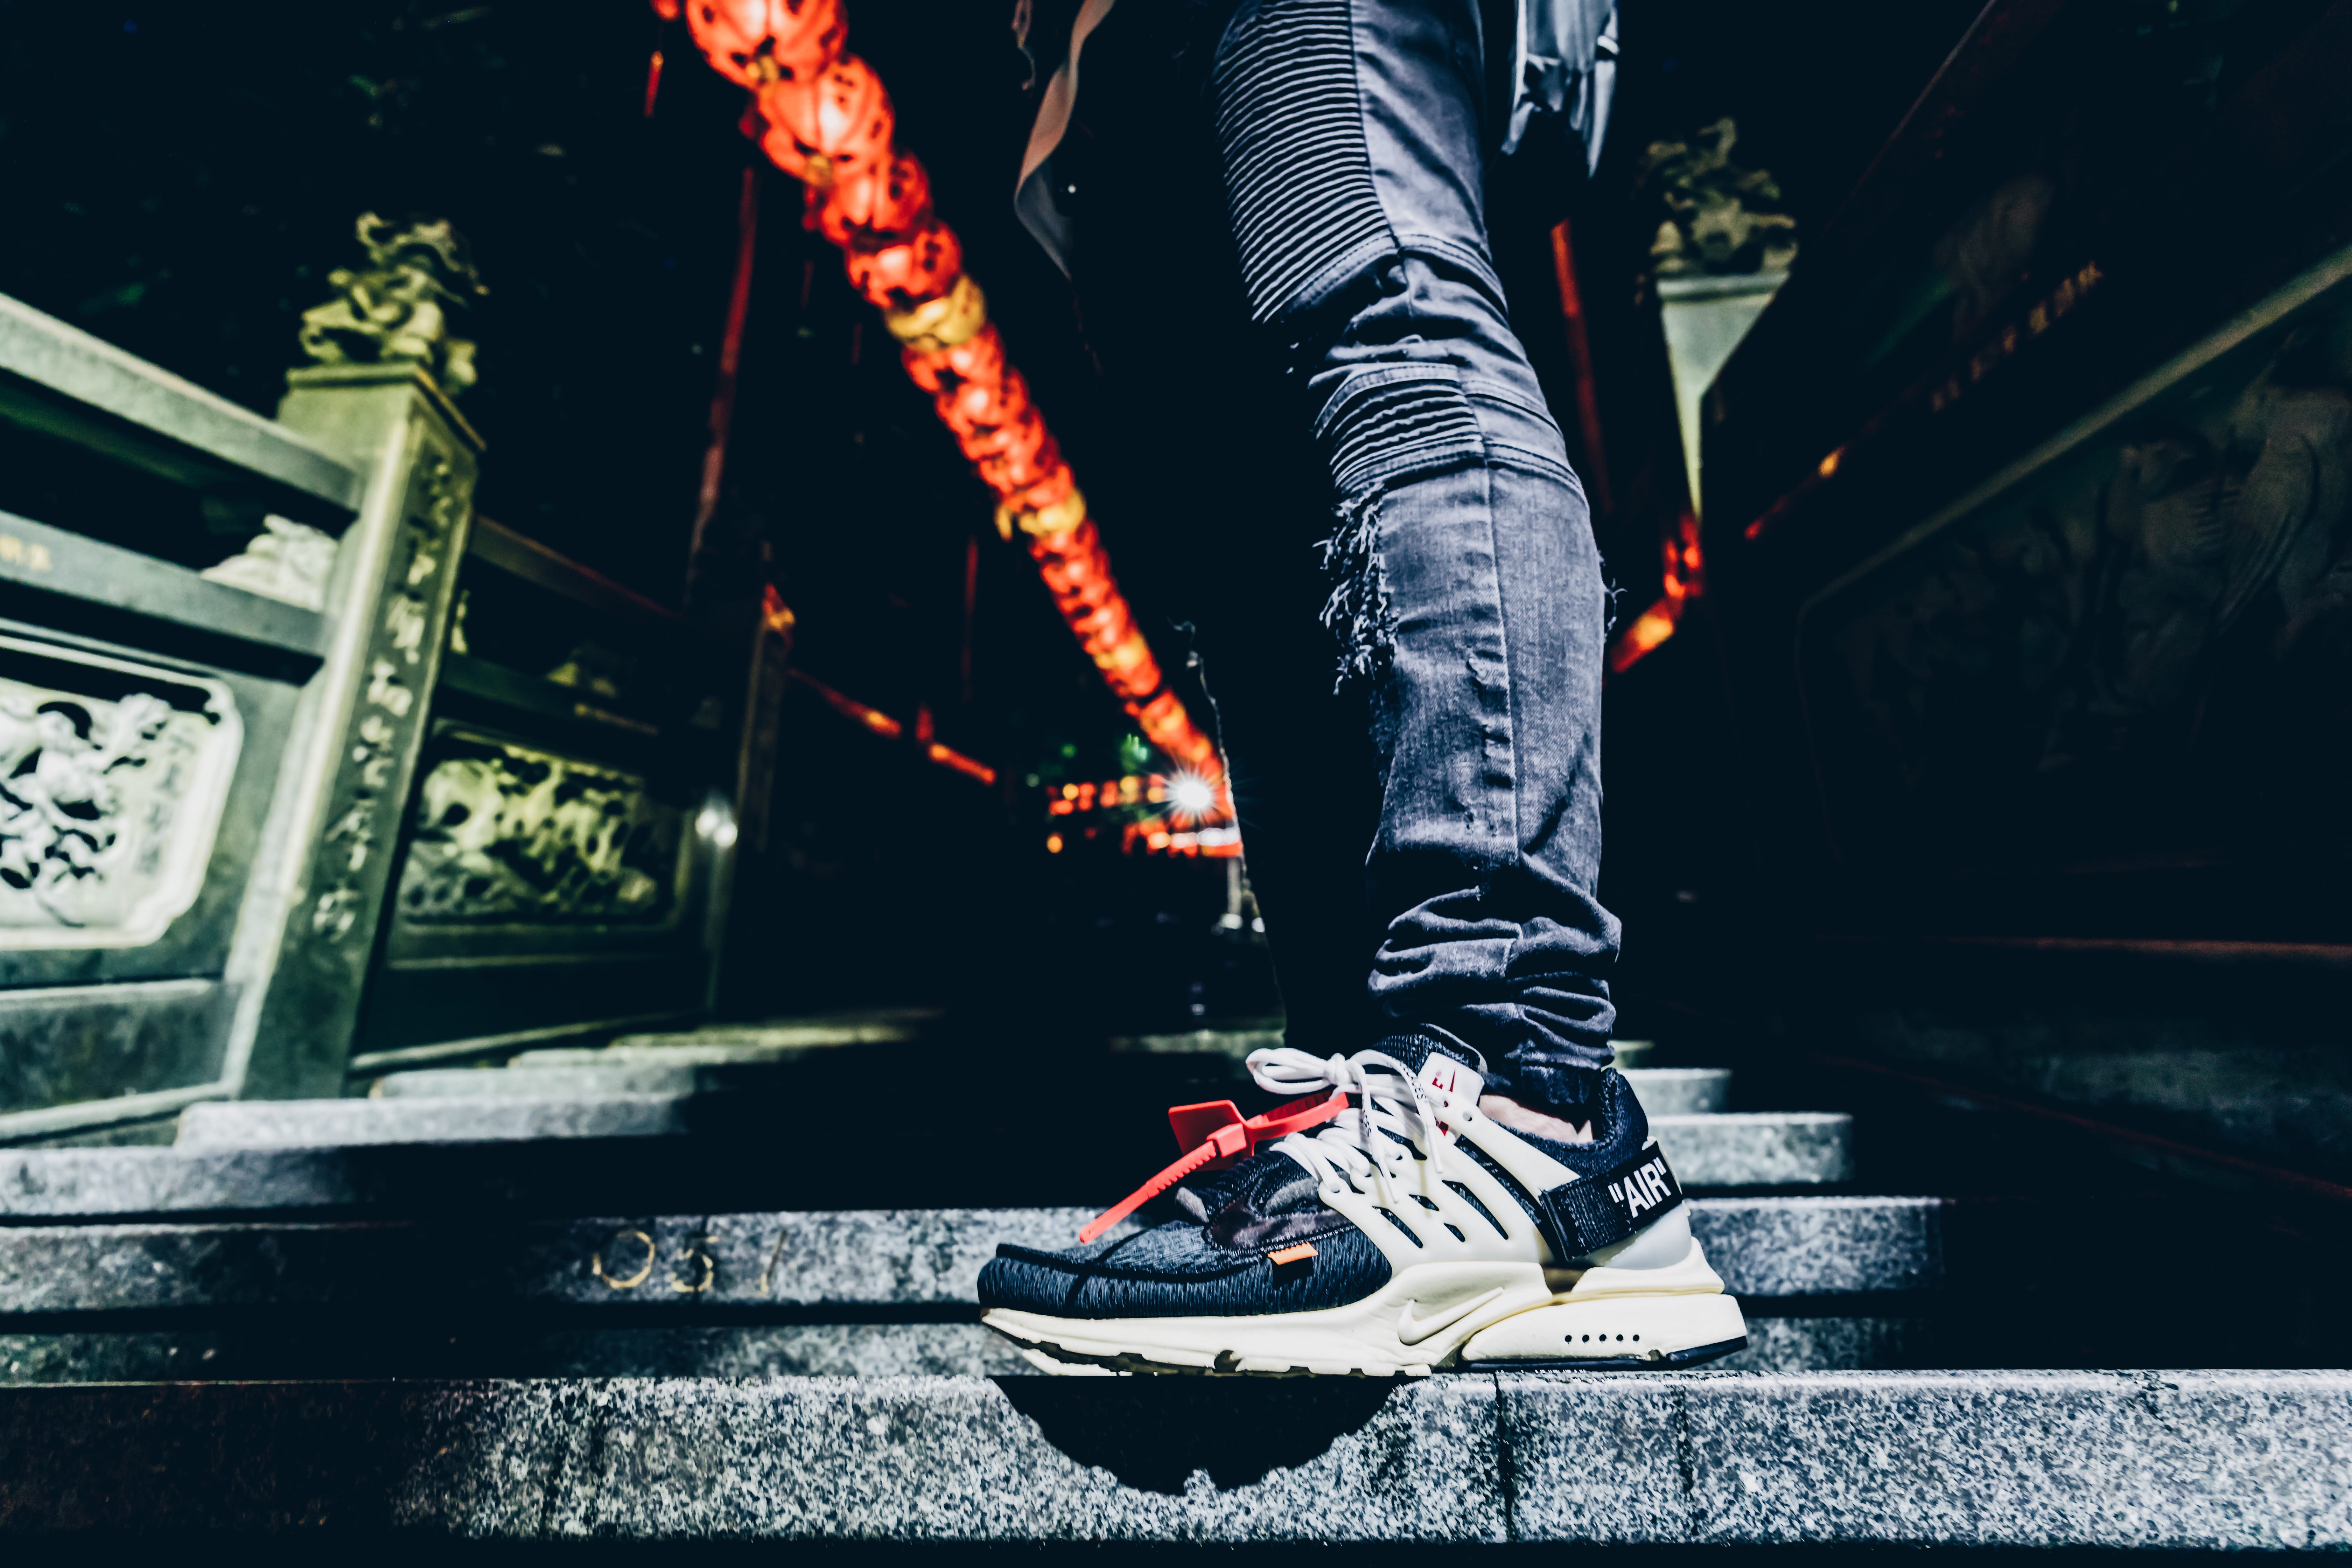 miscellanea, miscellaneous, sneakers, stairs, ladder, jeans, leg, sneaker wallpaper for mobile